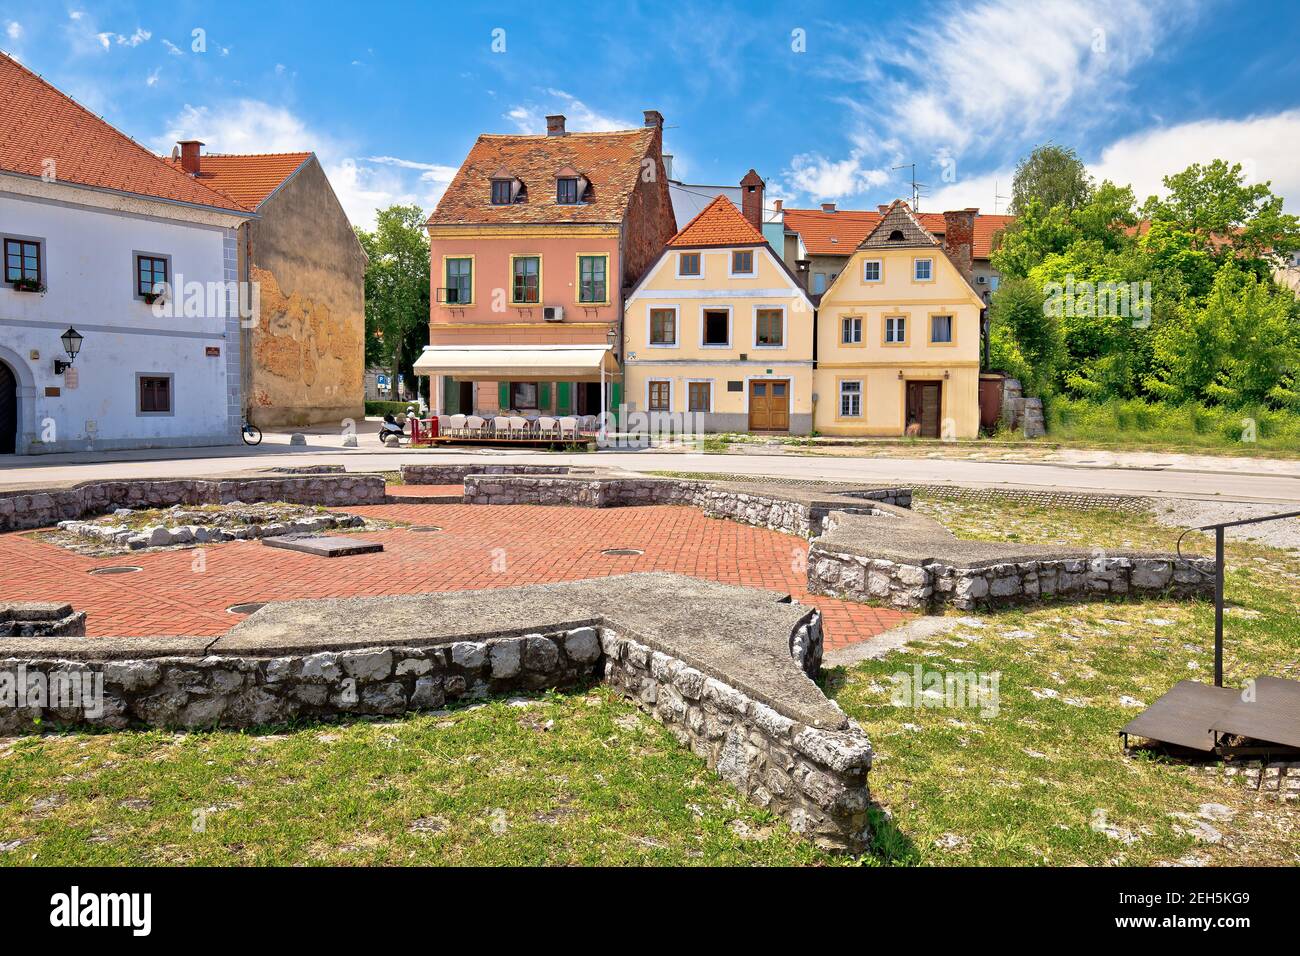 Town of Karlovac square and colorful architecture view, central Croatia Stock Photo